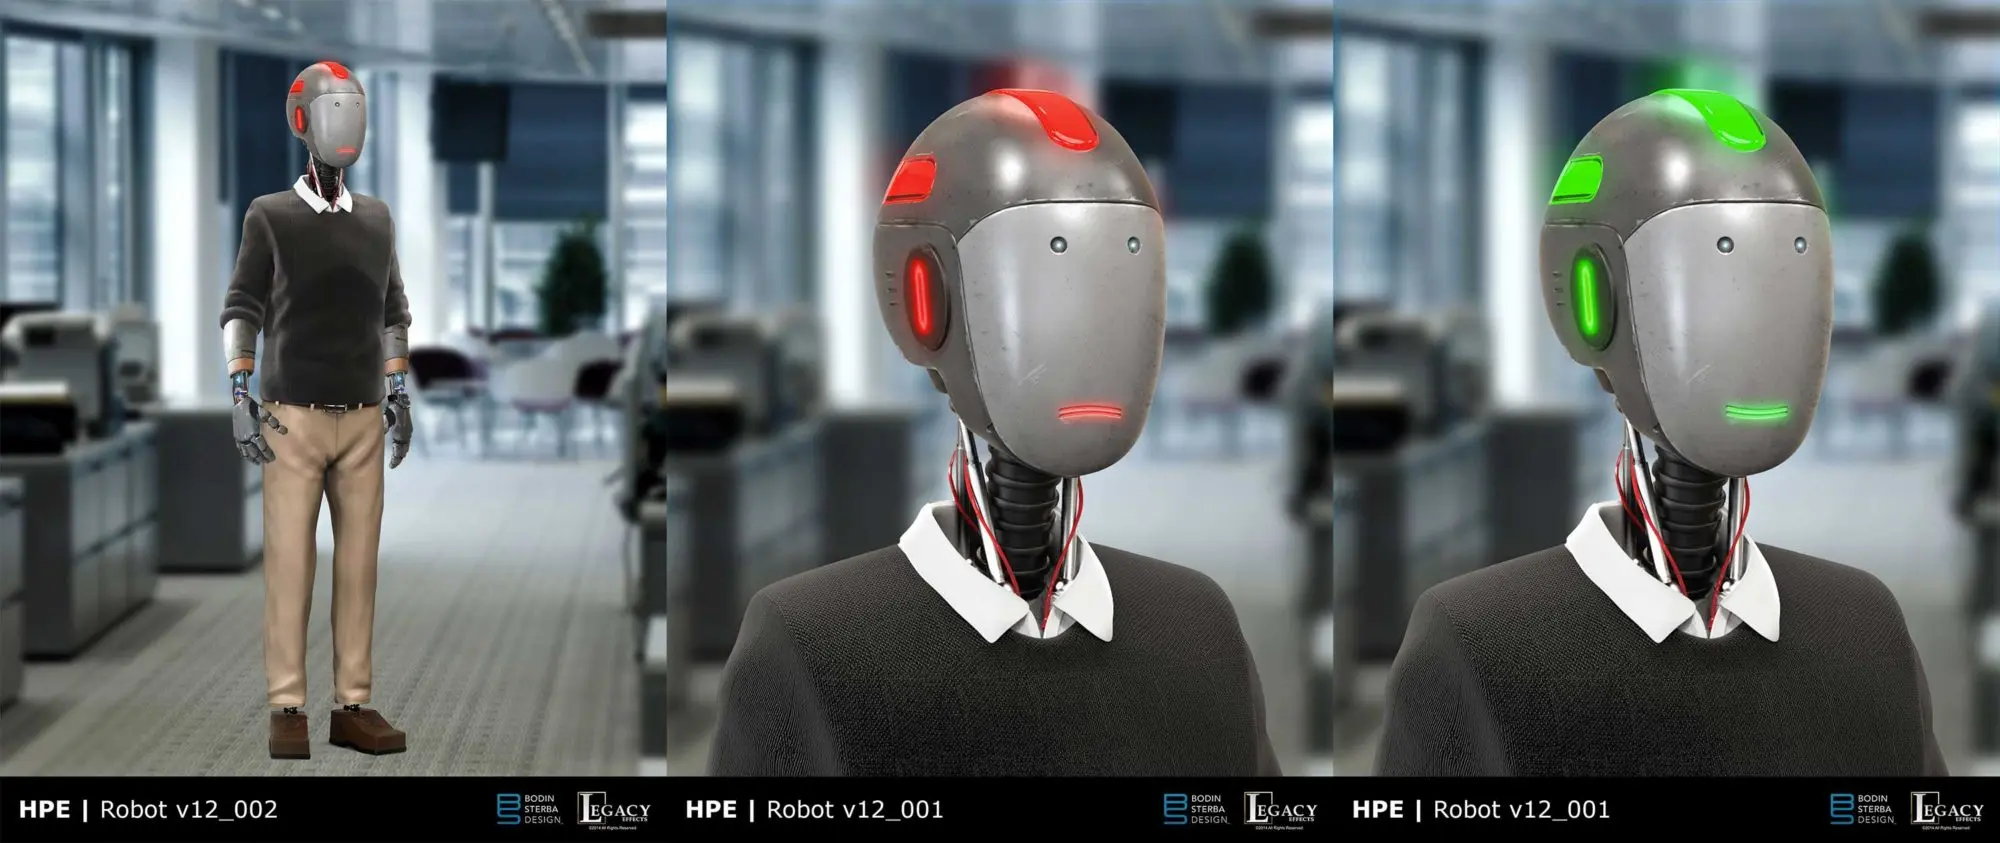 hewlett packard robot commercial - What is an example of a commercial robot